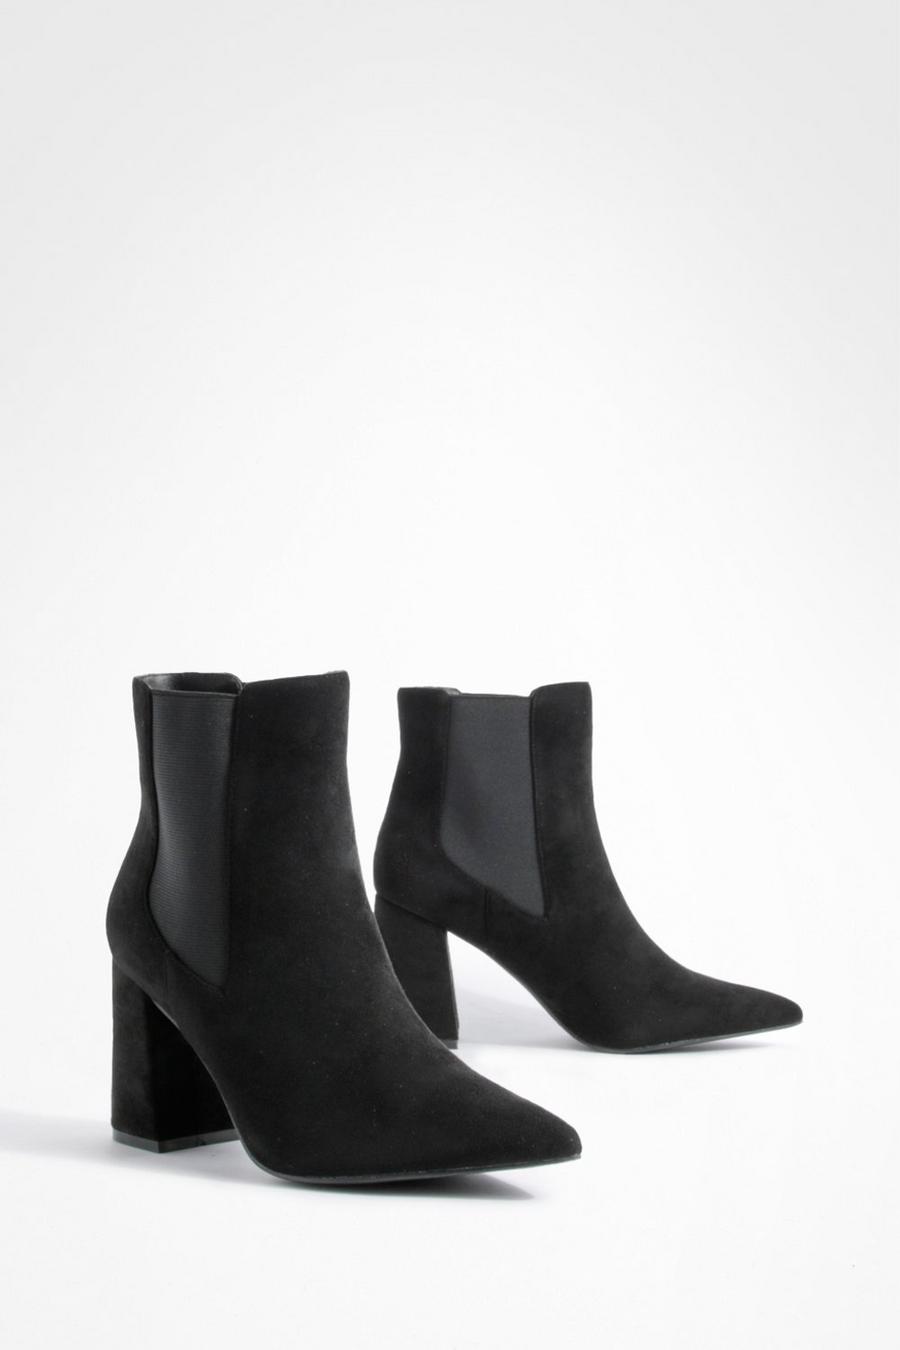 Black Faux Suede Block Heel Pointed Toe Ankle Boots image number 1